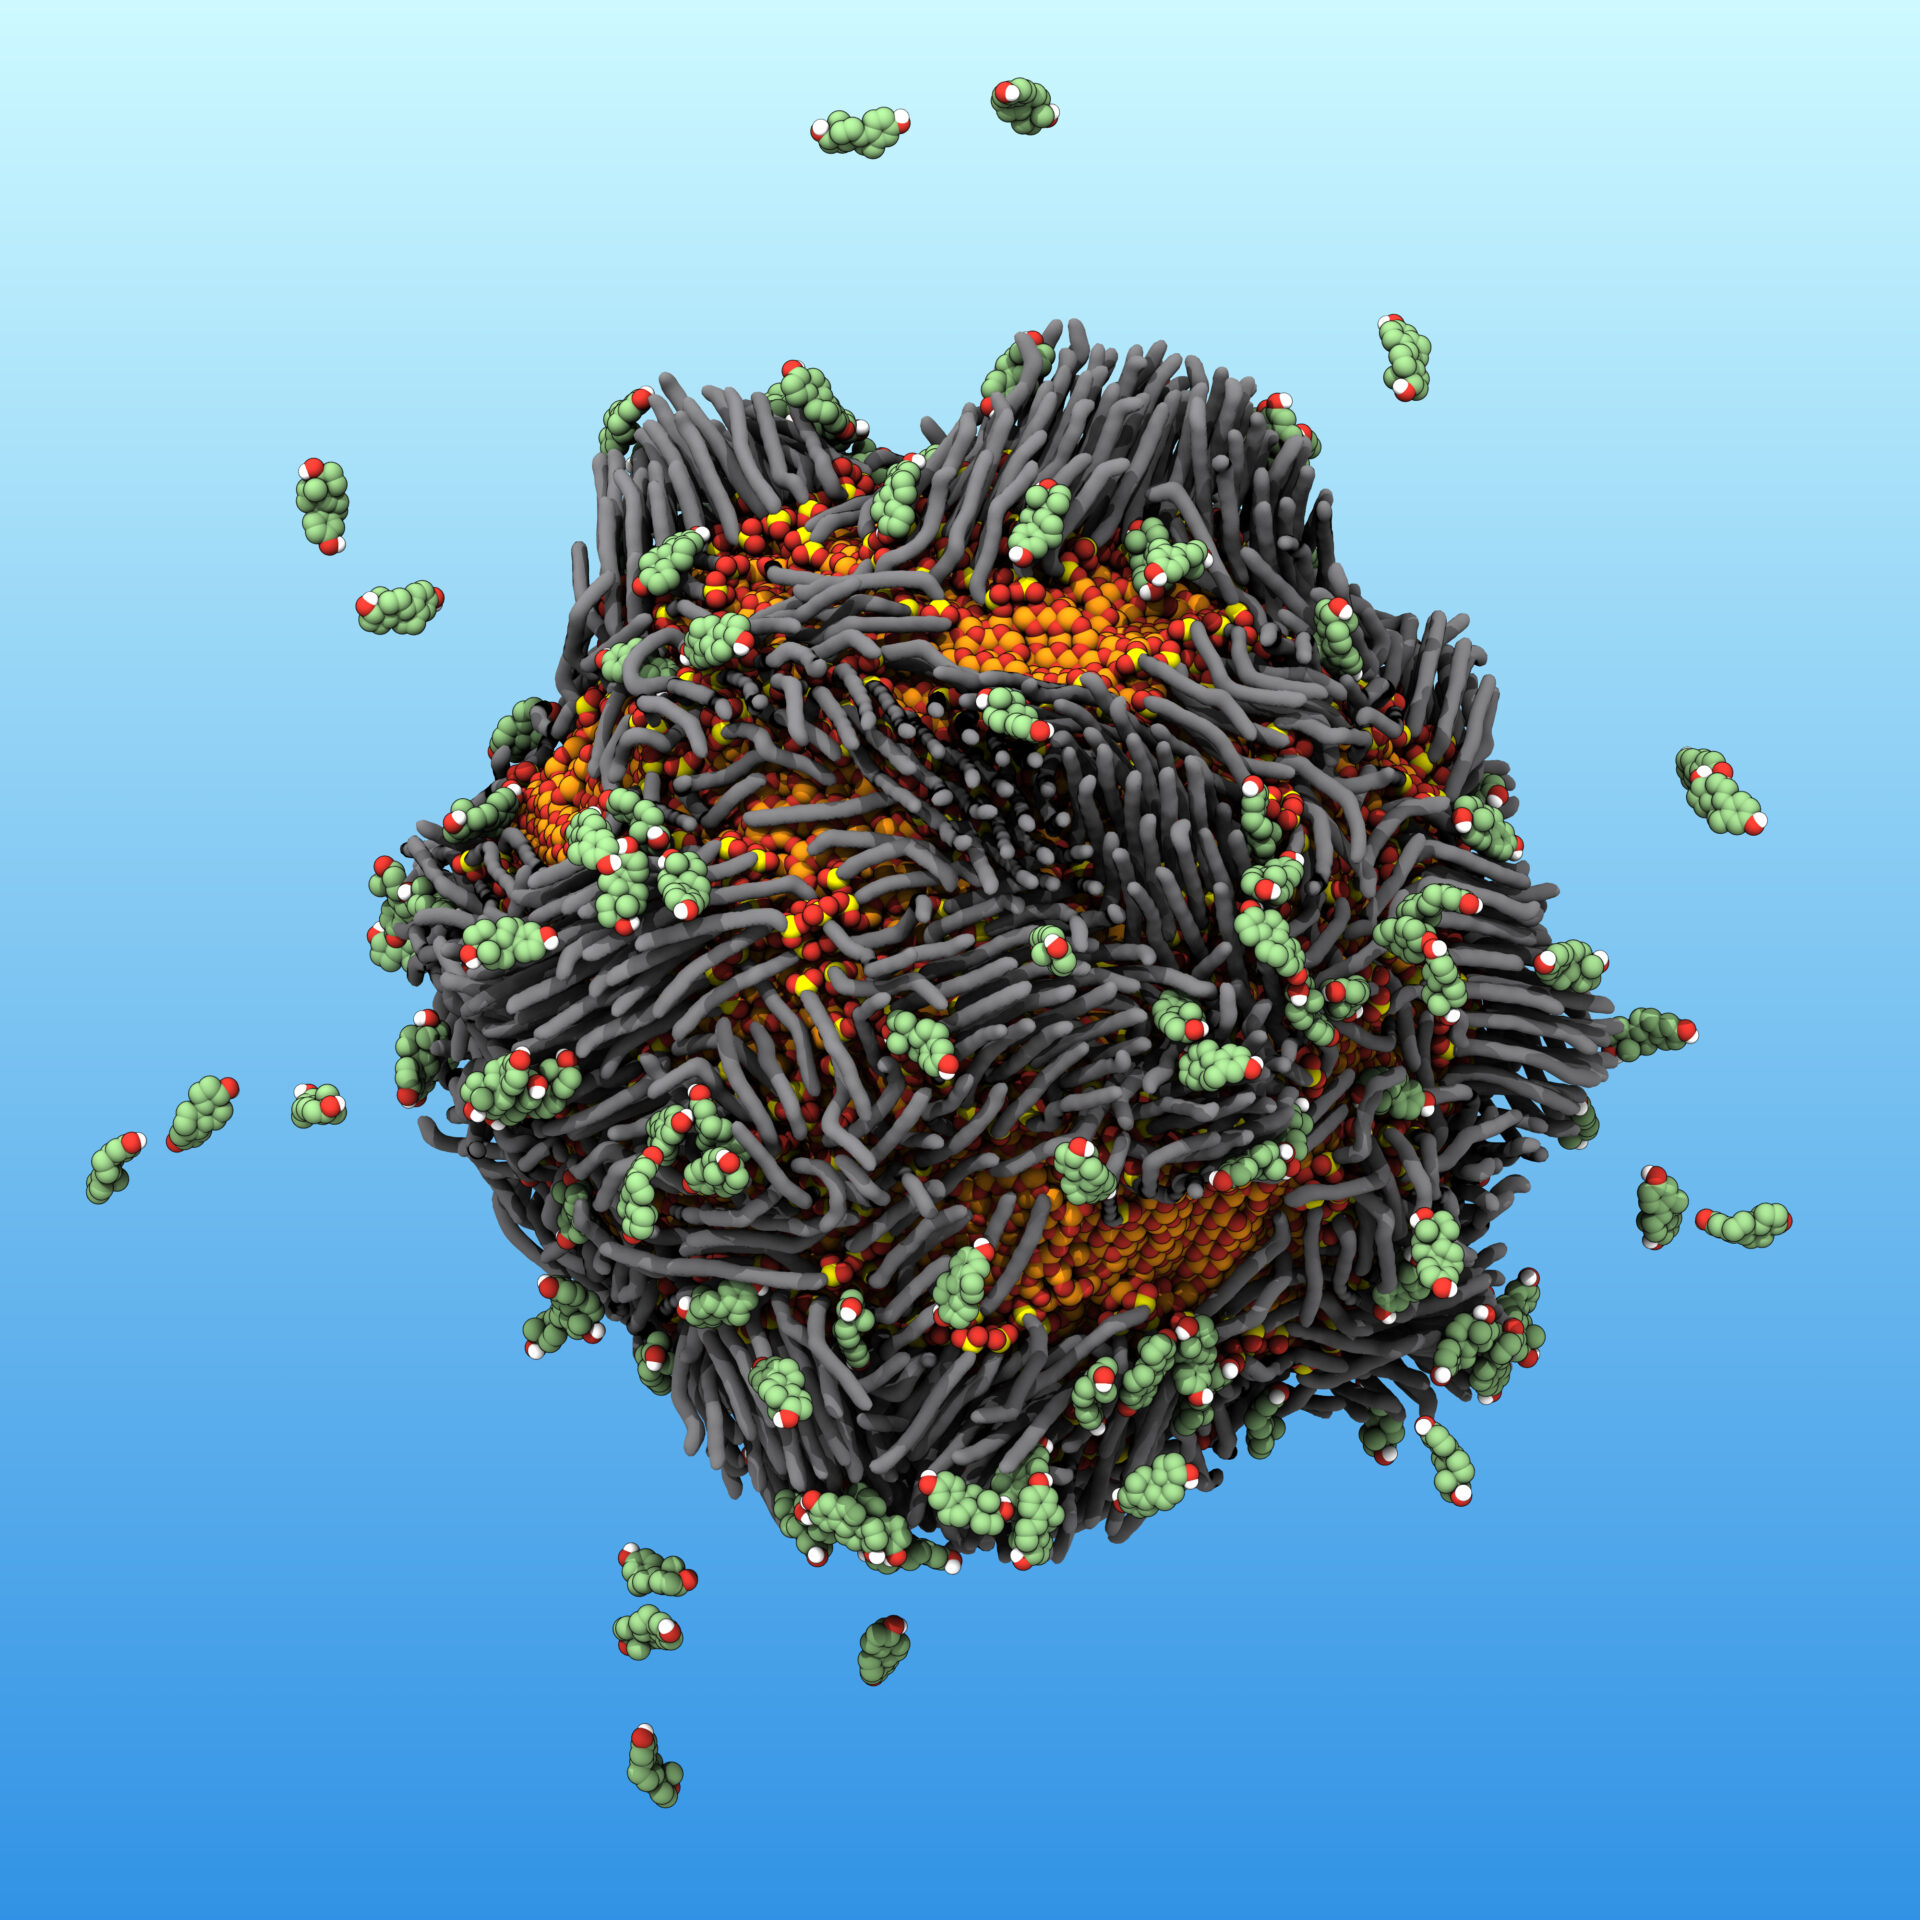 In this illustration, a “smart rust” nanoparticle attracts and traps estrogen molecules, which are represented by the floating objects. Dr. Dustin Vivod and Prof. Dr. Dirk Zahn, Computer Chemistry Center (CCC), Friedrich-Alexander-Universität Erlangen-Nürnberg